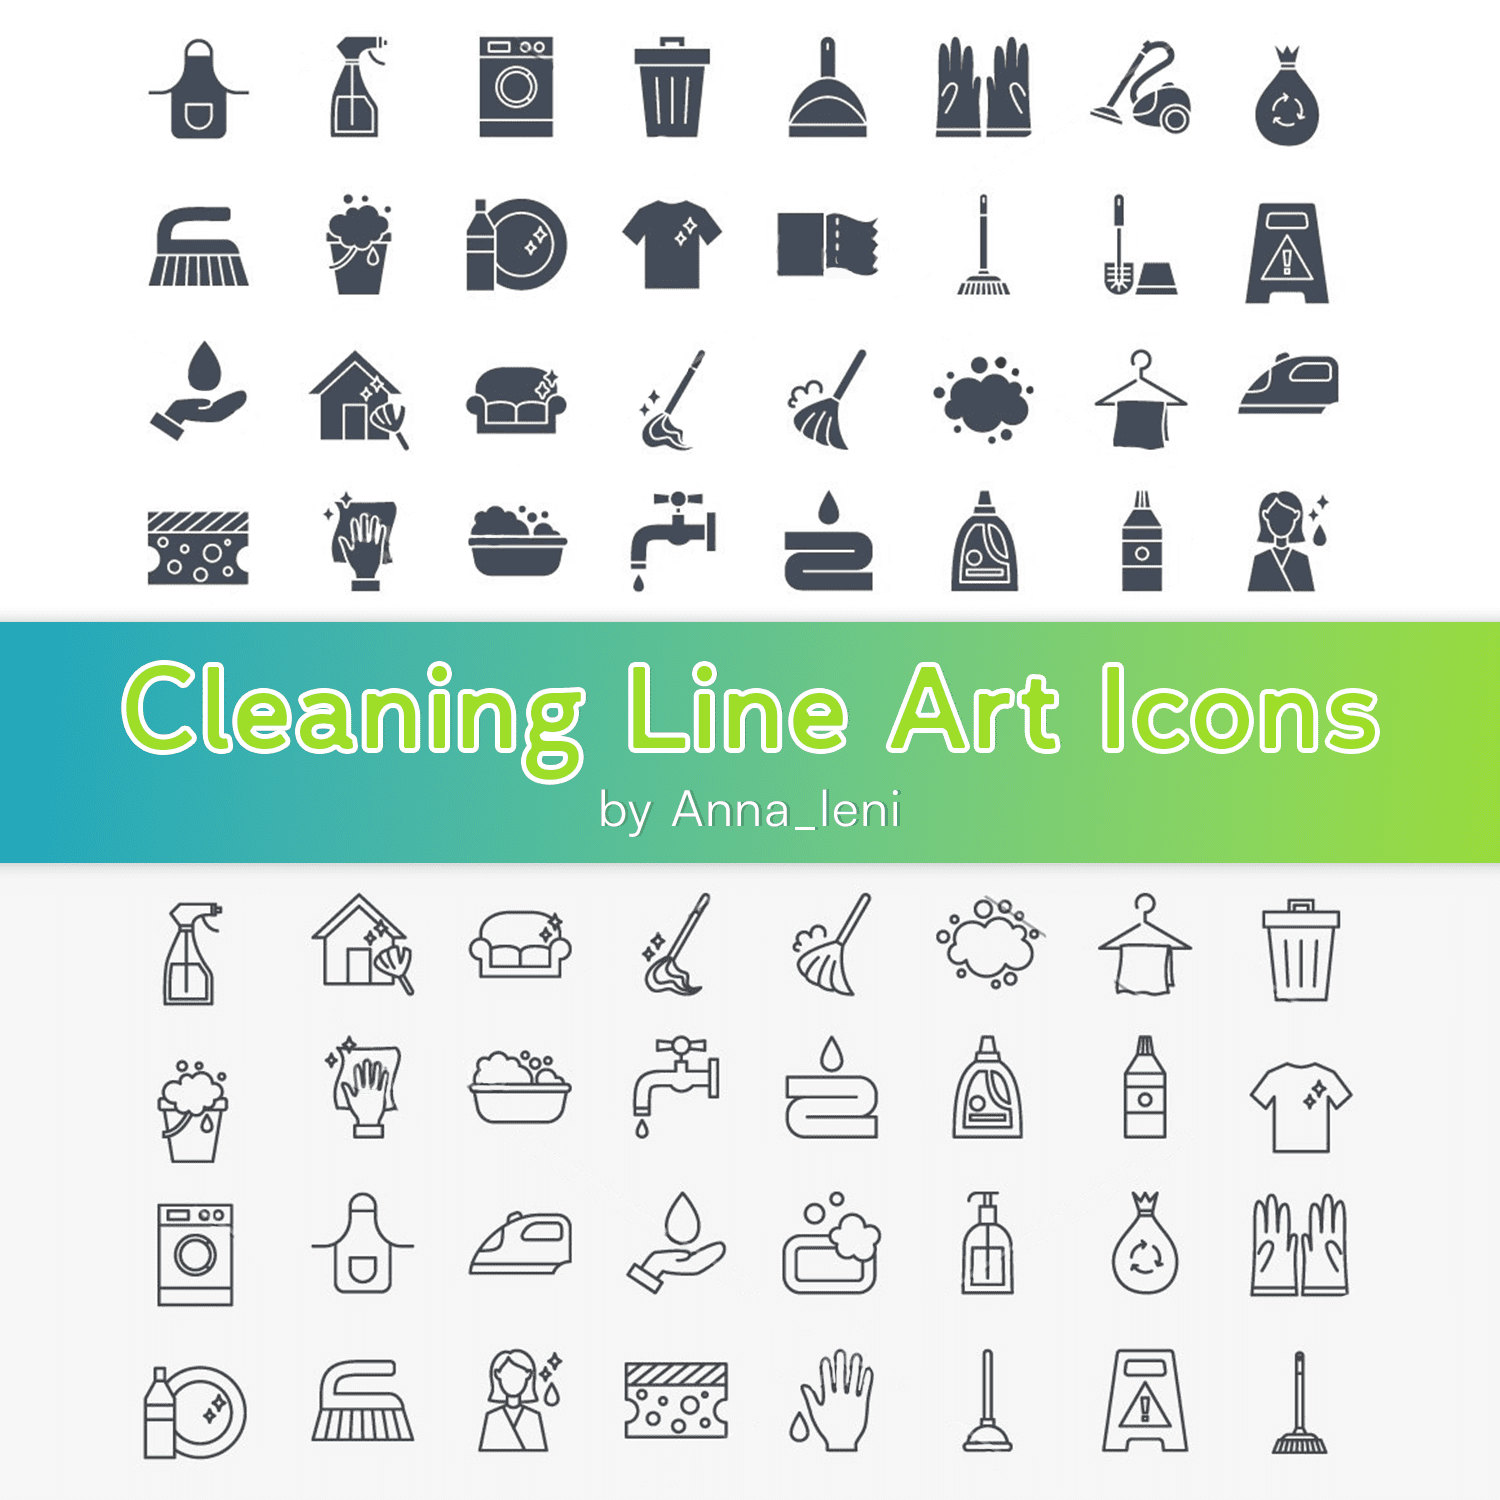 Cleaning Line Art Icons.